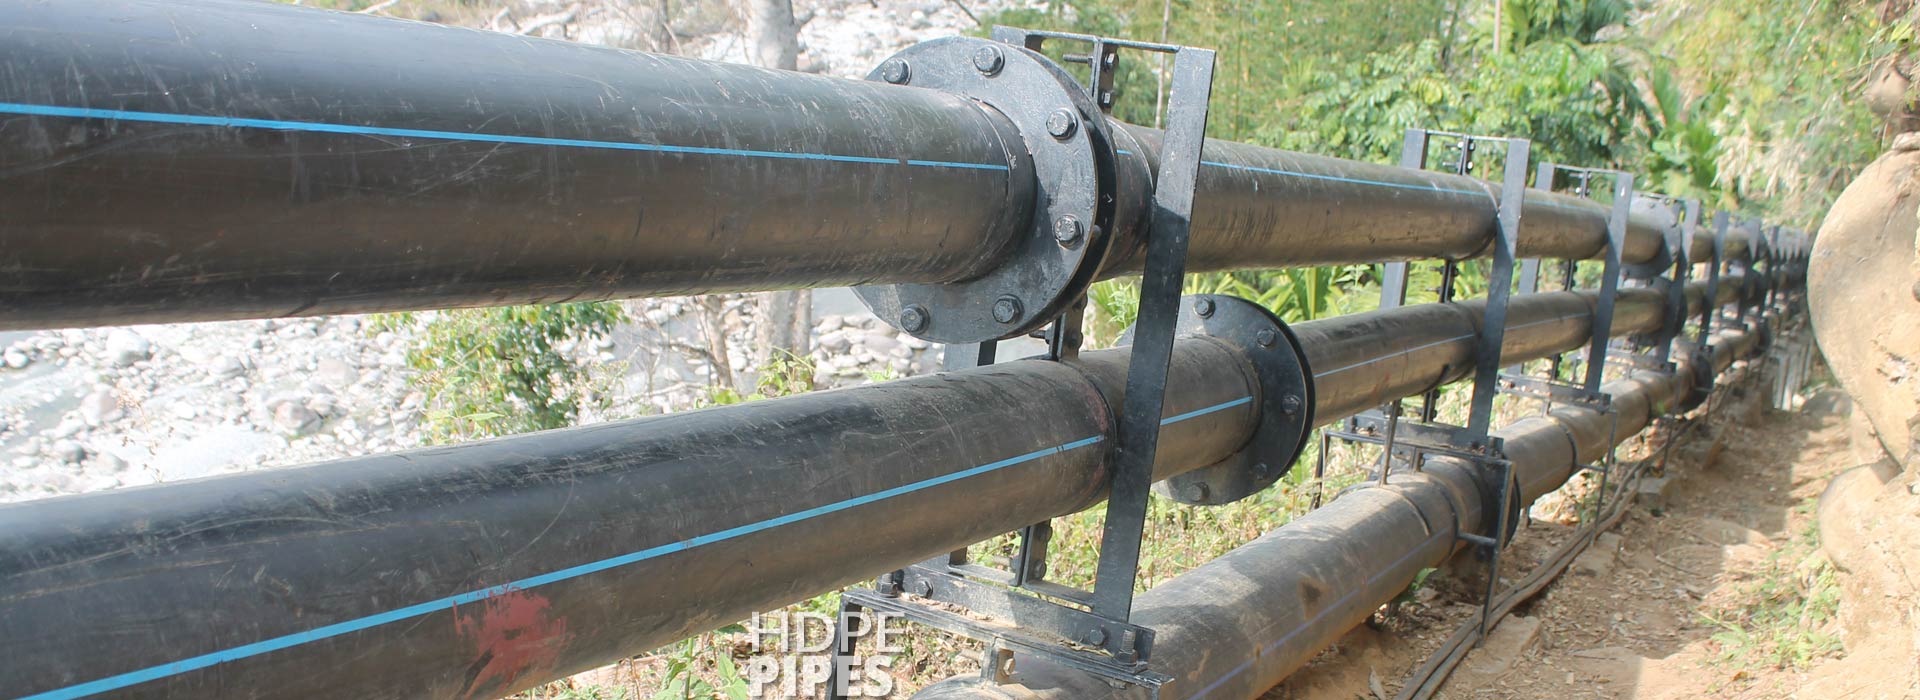 HDPE Pipes from Captain Pipes Ltd.